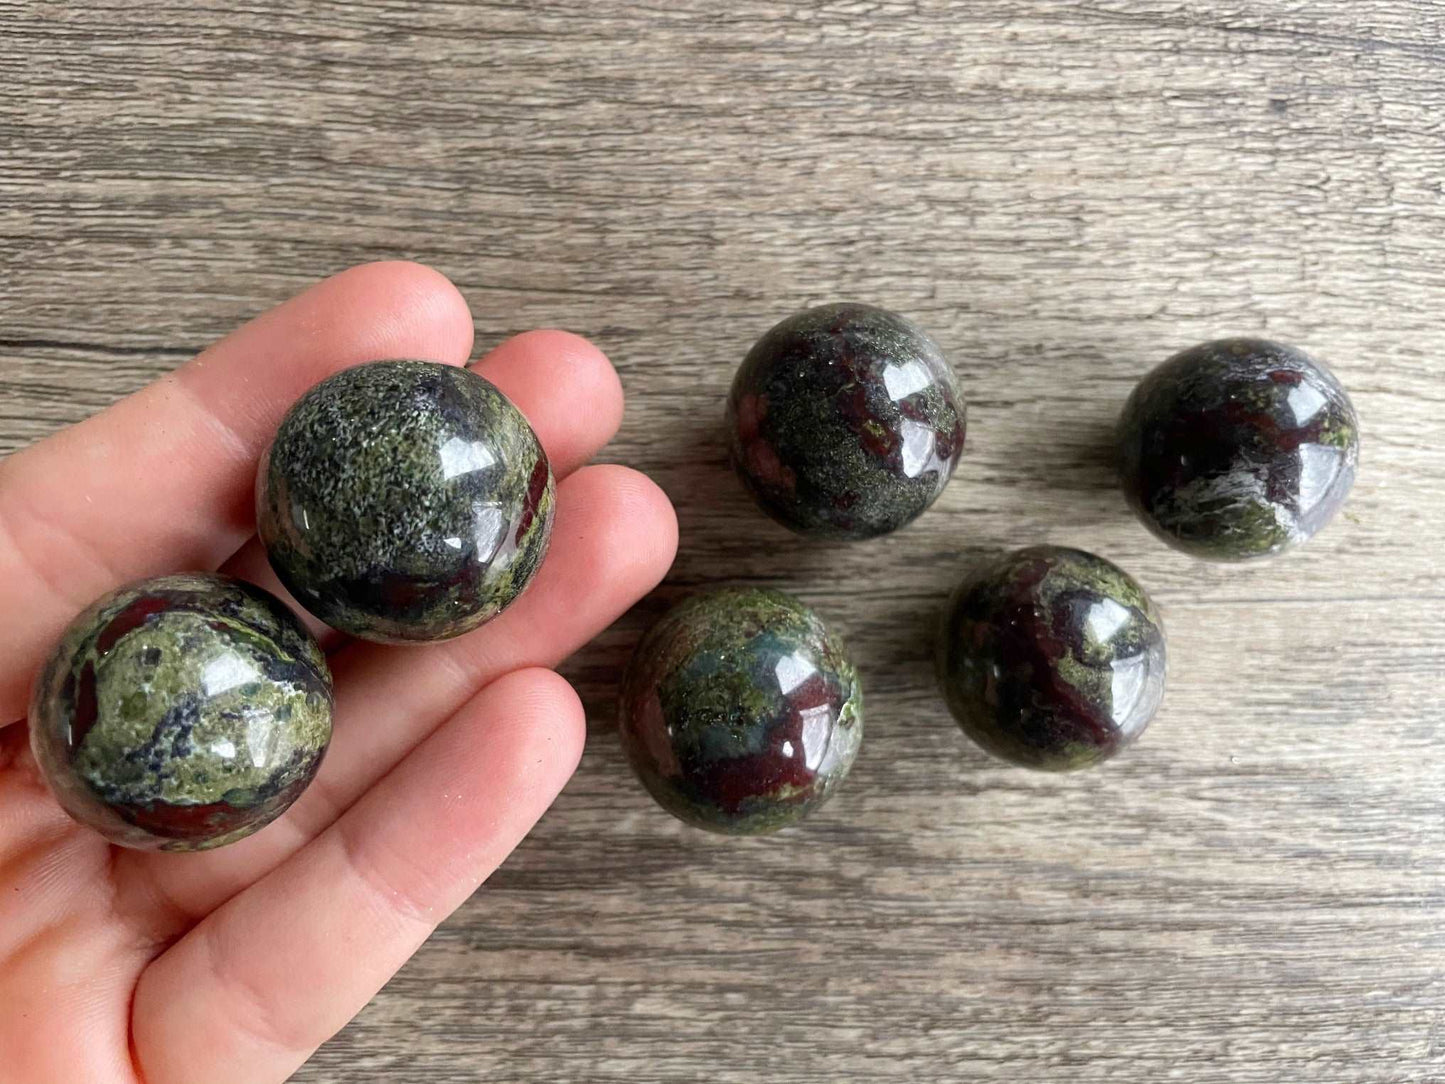 Pictured is a sphere carved out of dragon bloodstone.